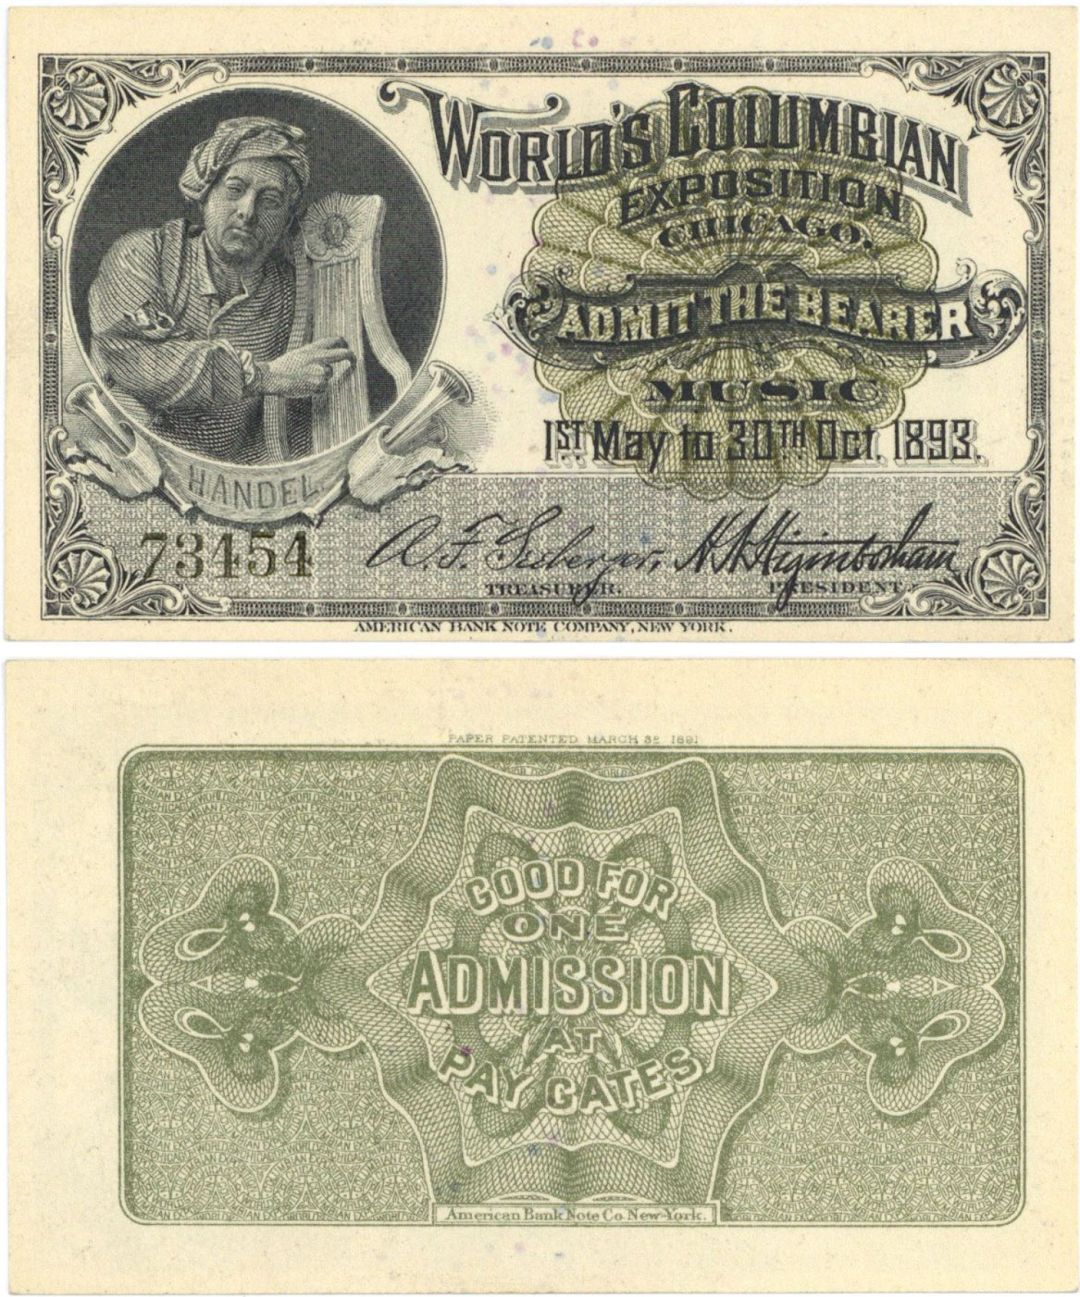 Ticket with Man with Instrument for the 1893 World's Columbian Exposition Chicago - World's Fair